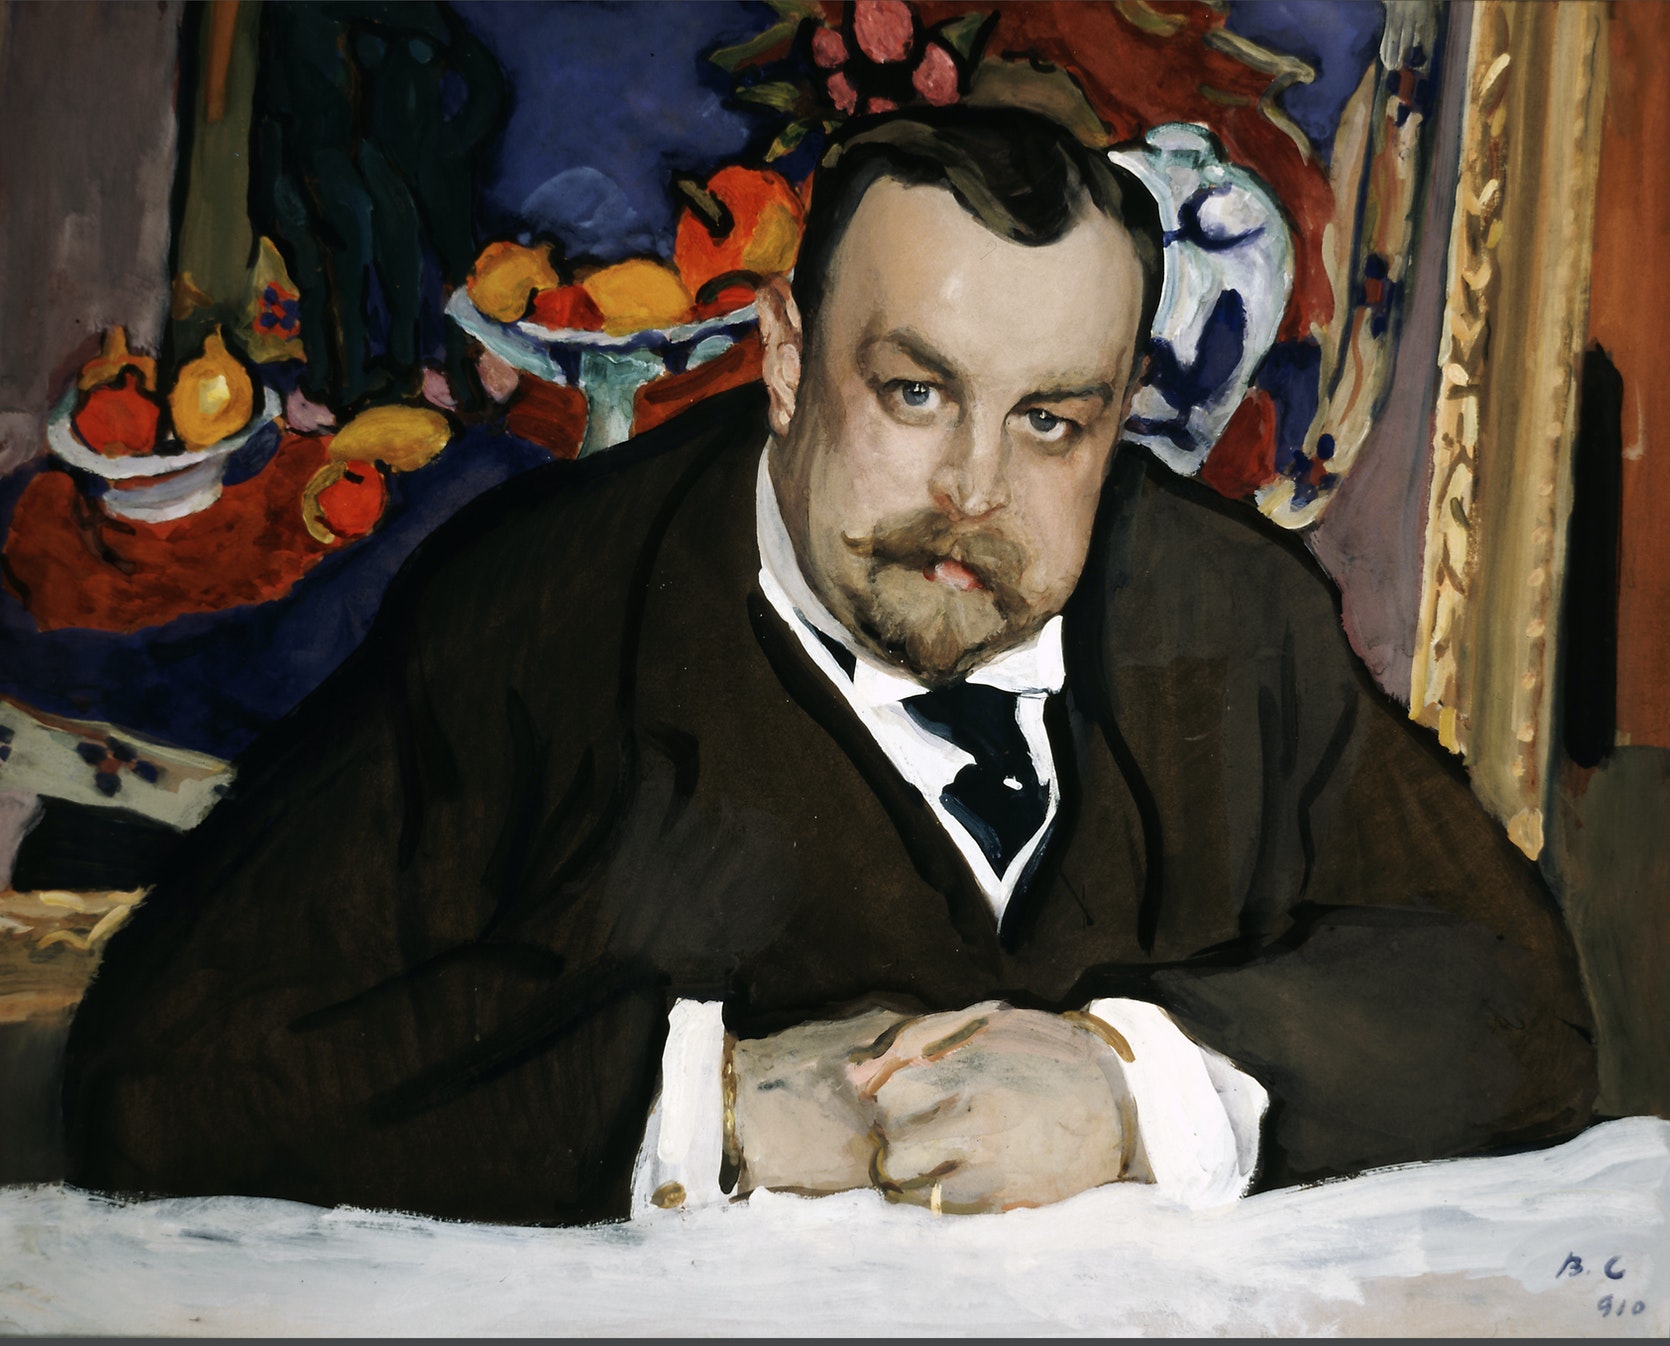 Valentin Serov, "Portrait of the collector of modern Russian and French painting Ivan Abramovich Morozov", Moscou, 1910, Tretyakov Gallery, Moscou